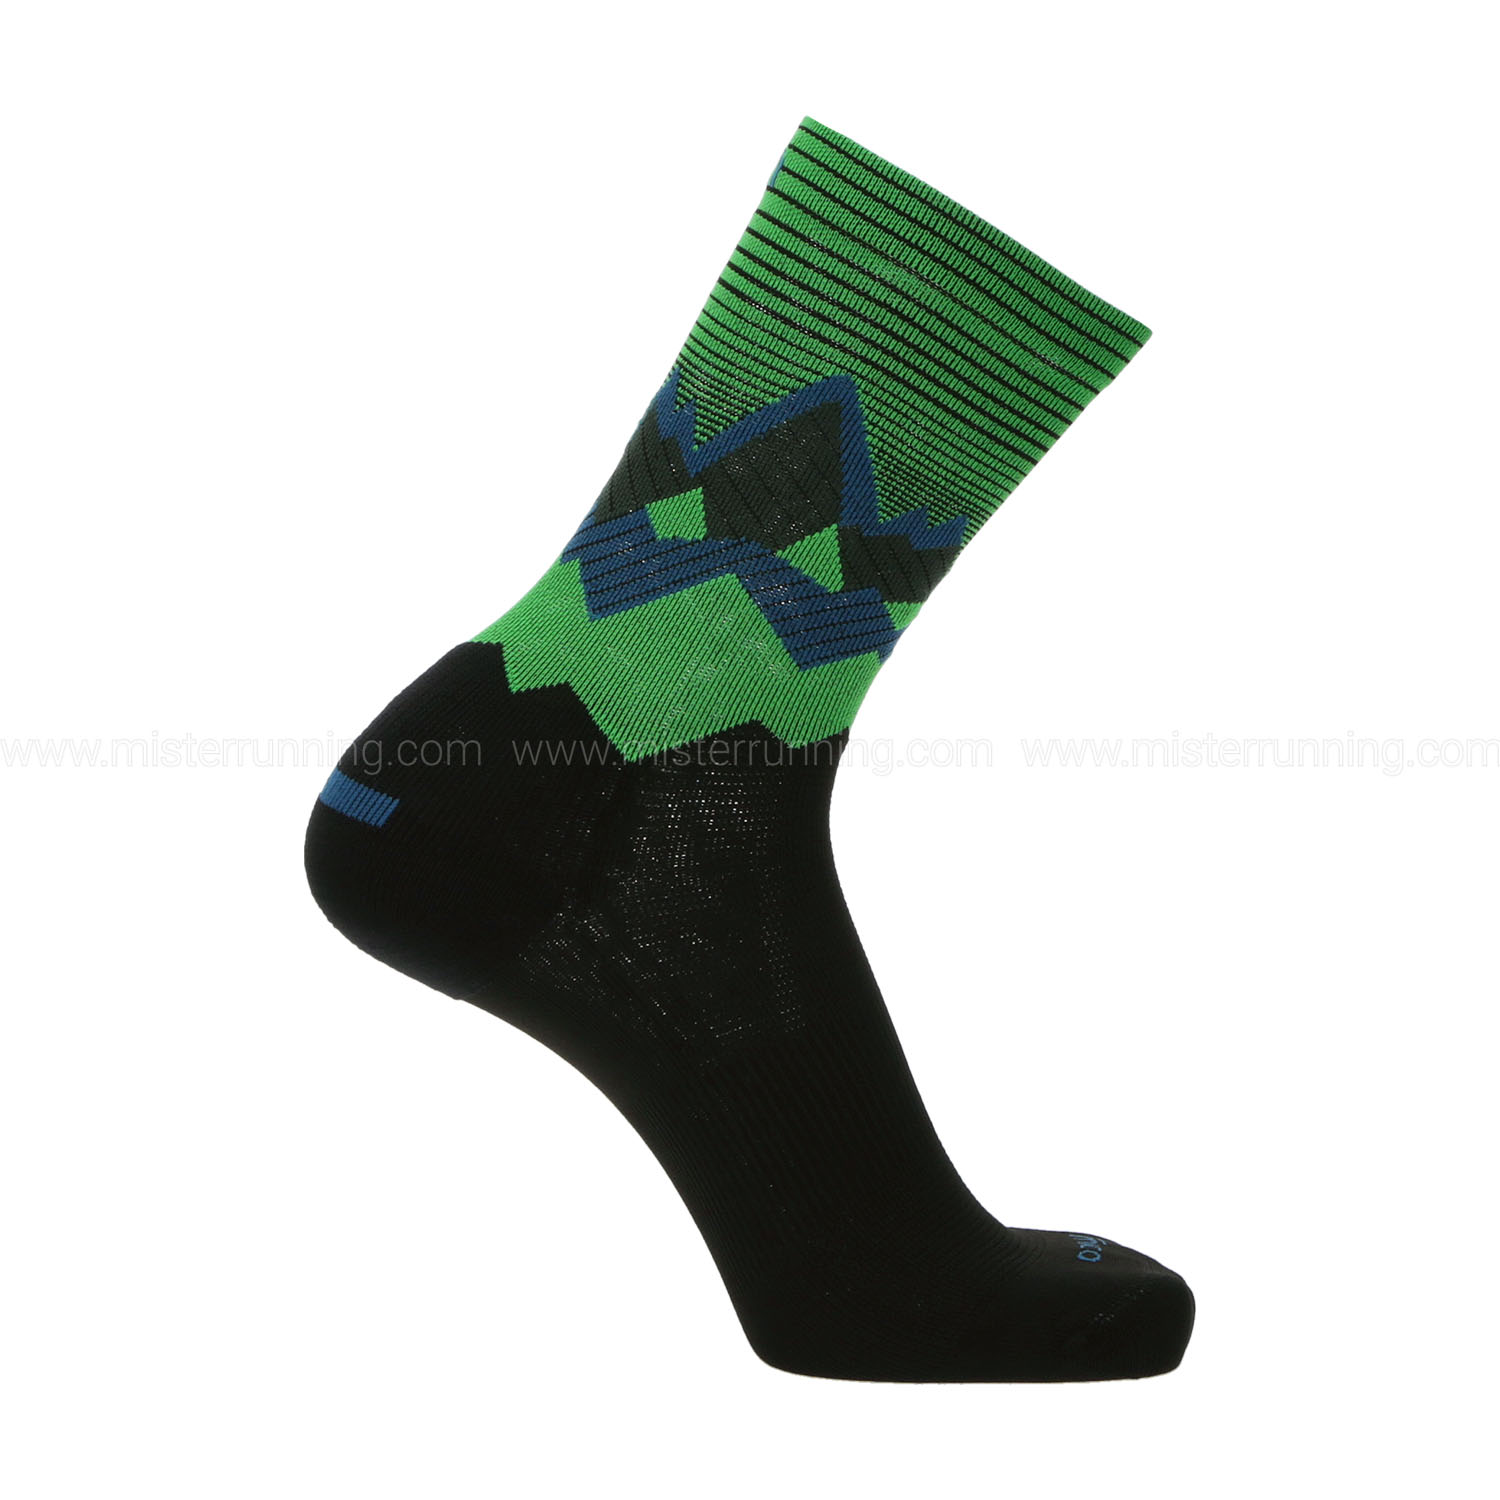 Mico Performance Extra Dry Light Weight Calcetines - Nero/Verde Fluo